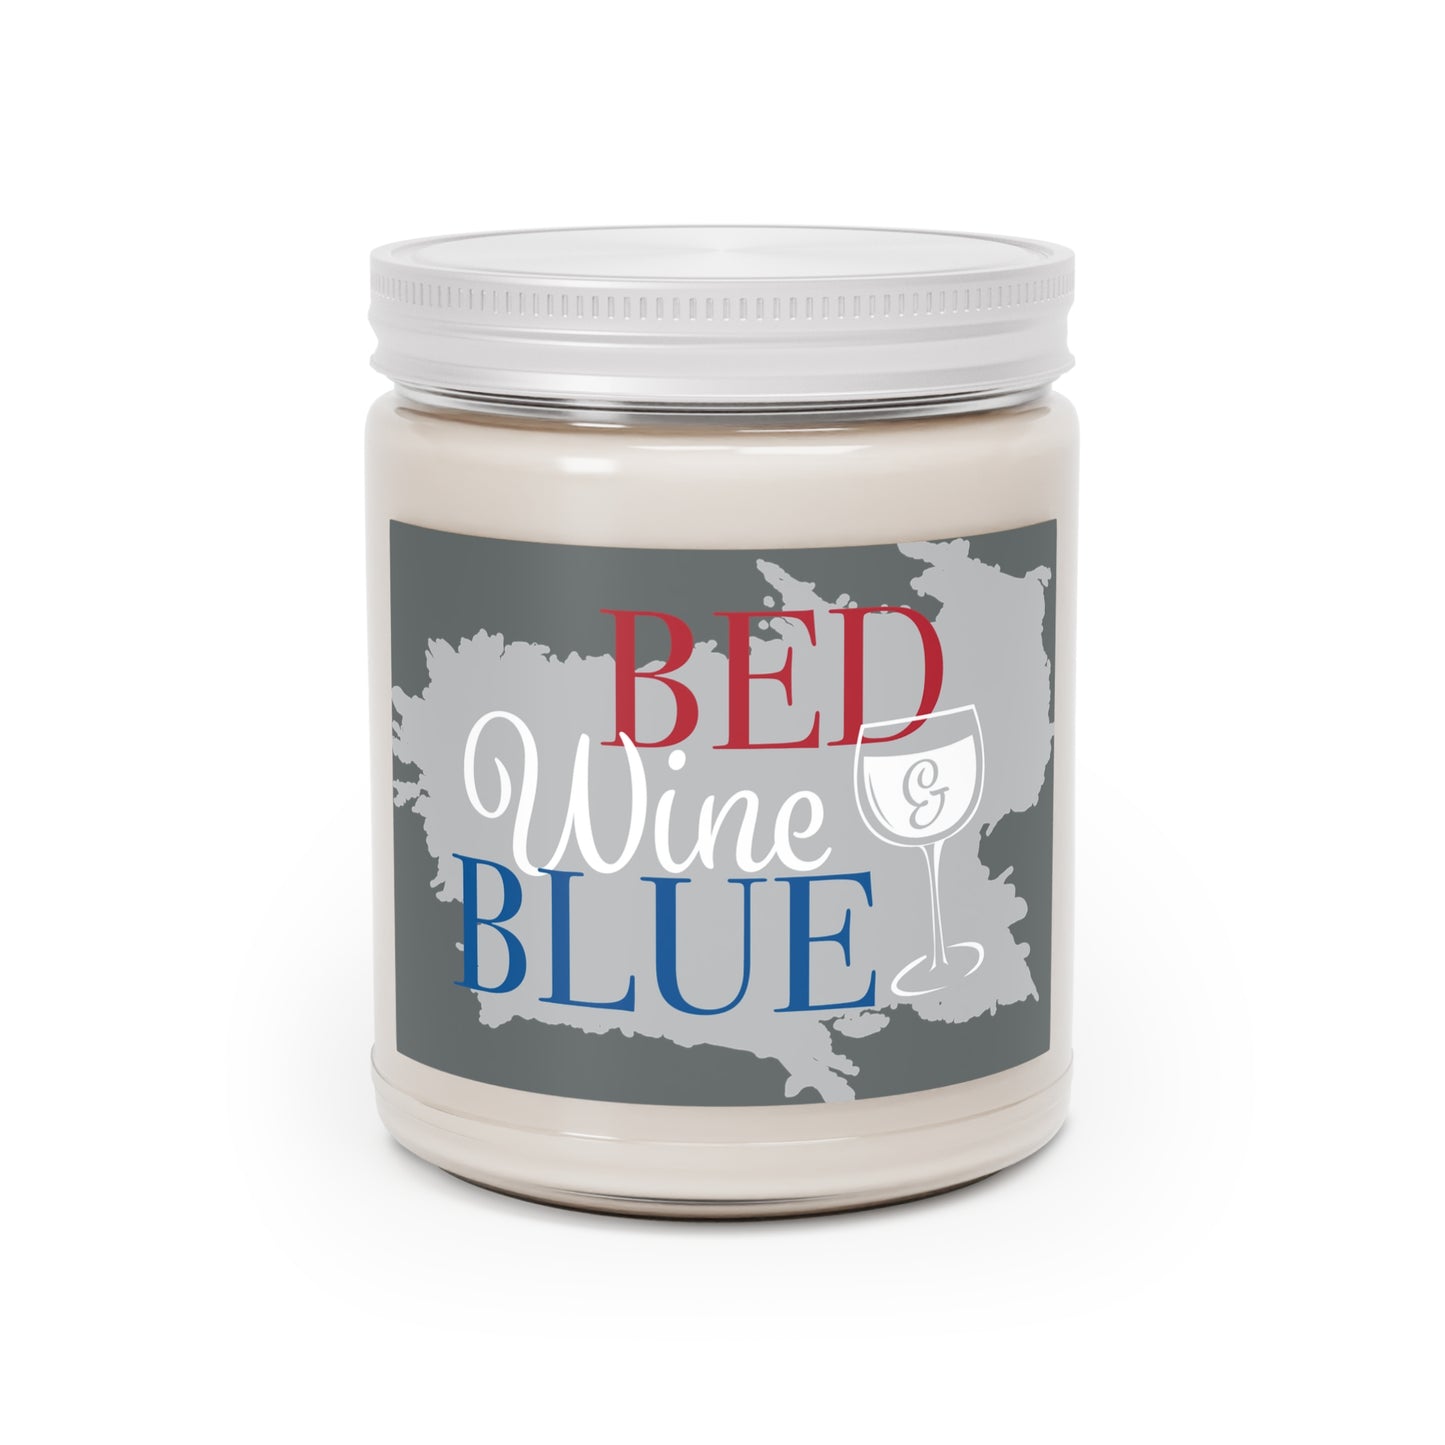 Patriotic Bed, Wine, Blue Scented Candles, 9oz